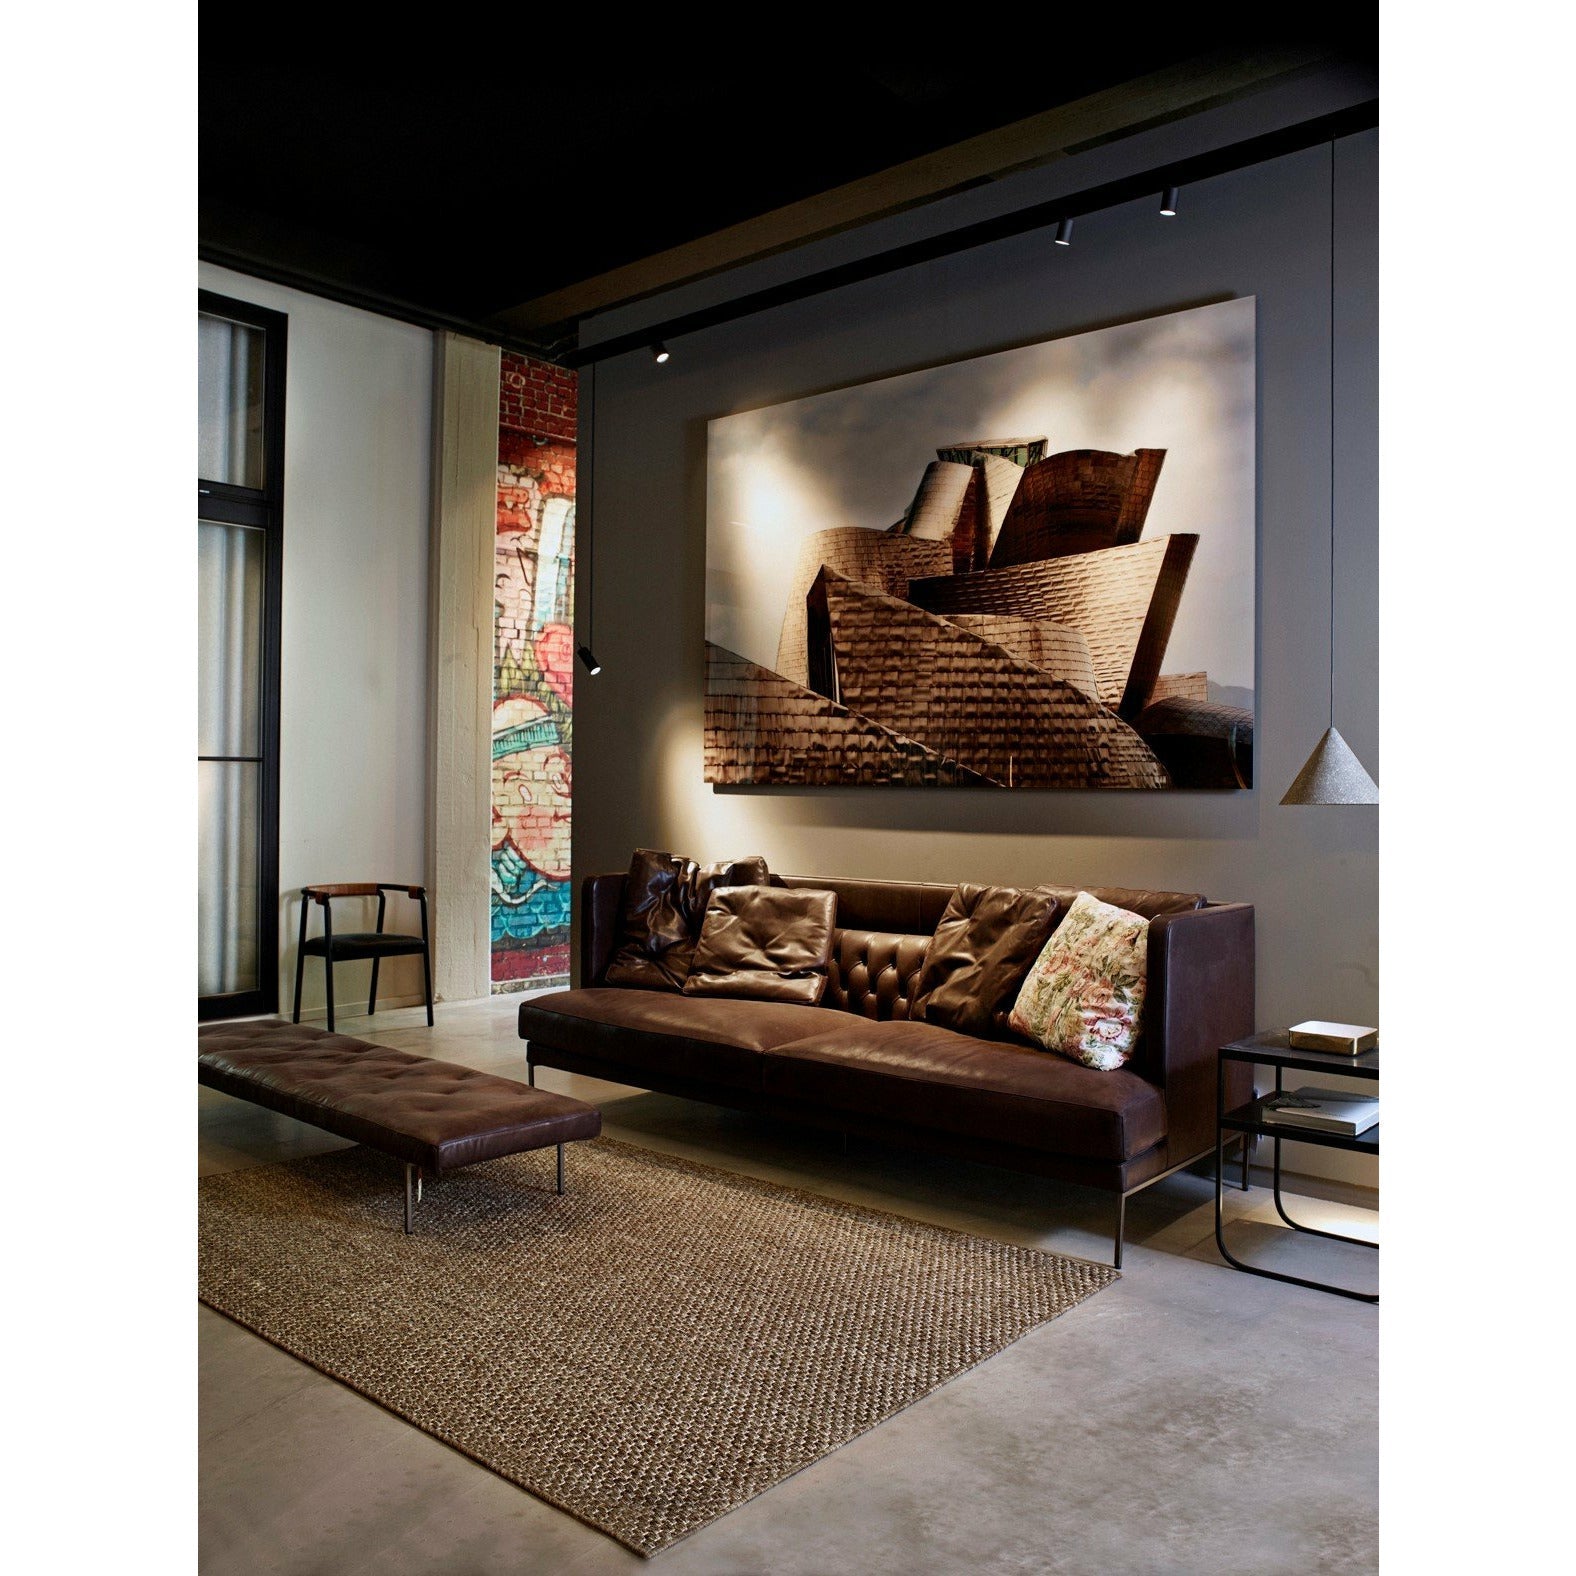 Massimo Belize Duster Taupe, 240x320 cm